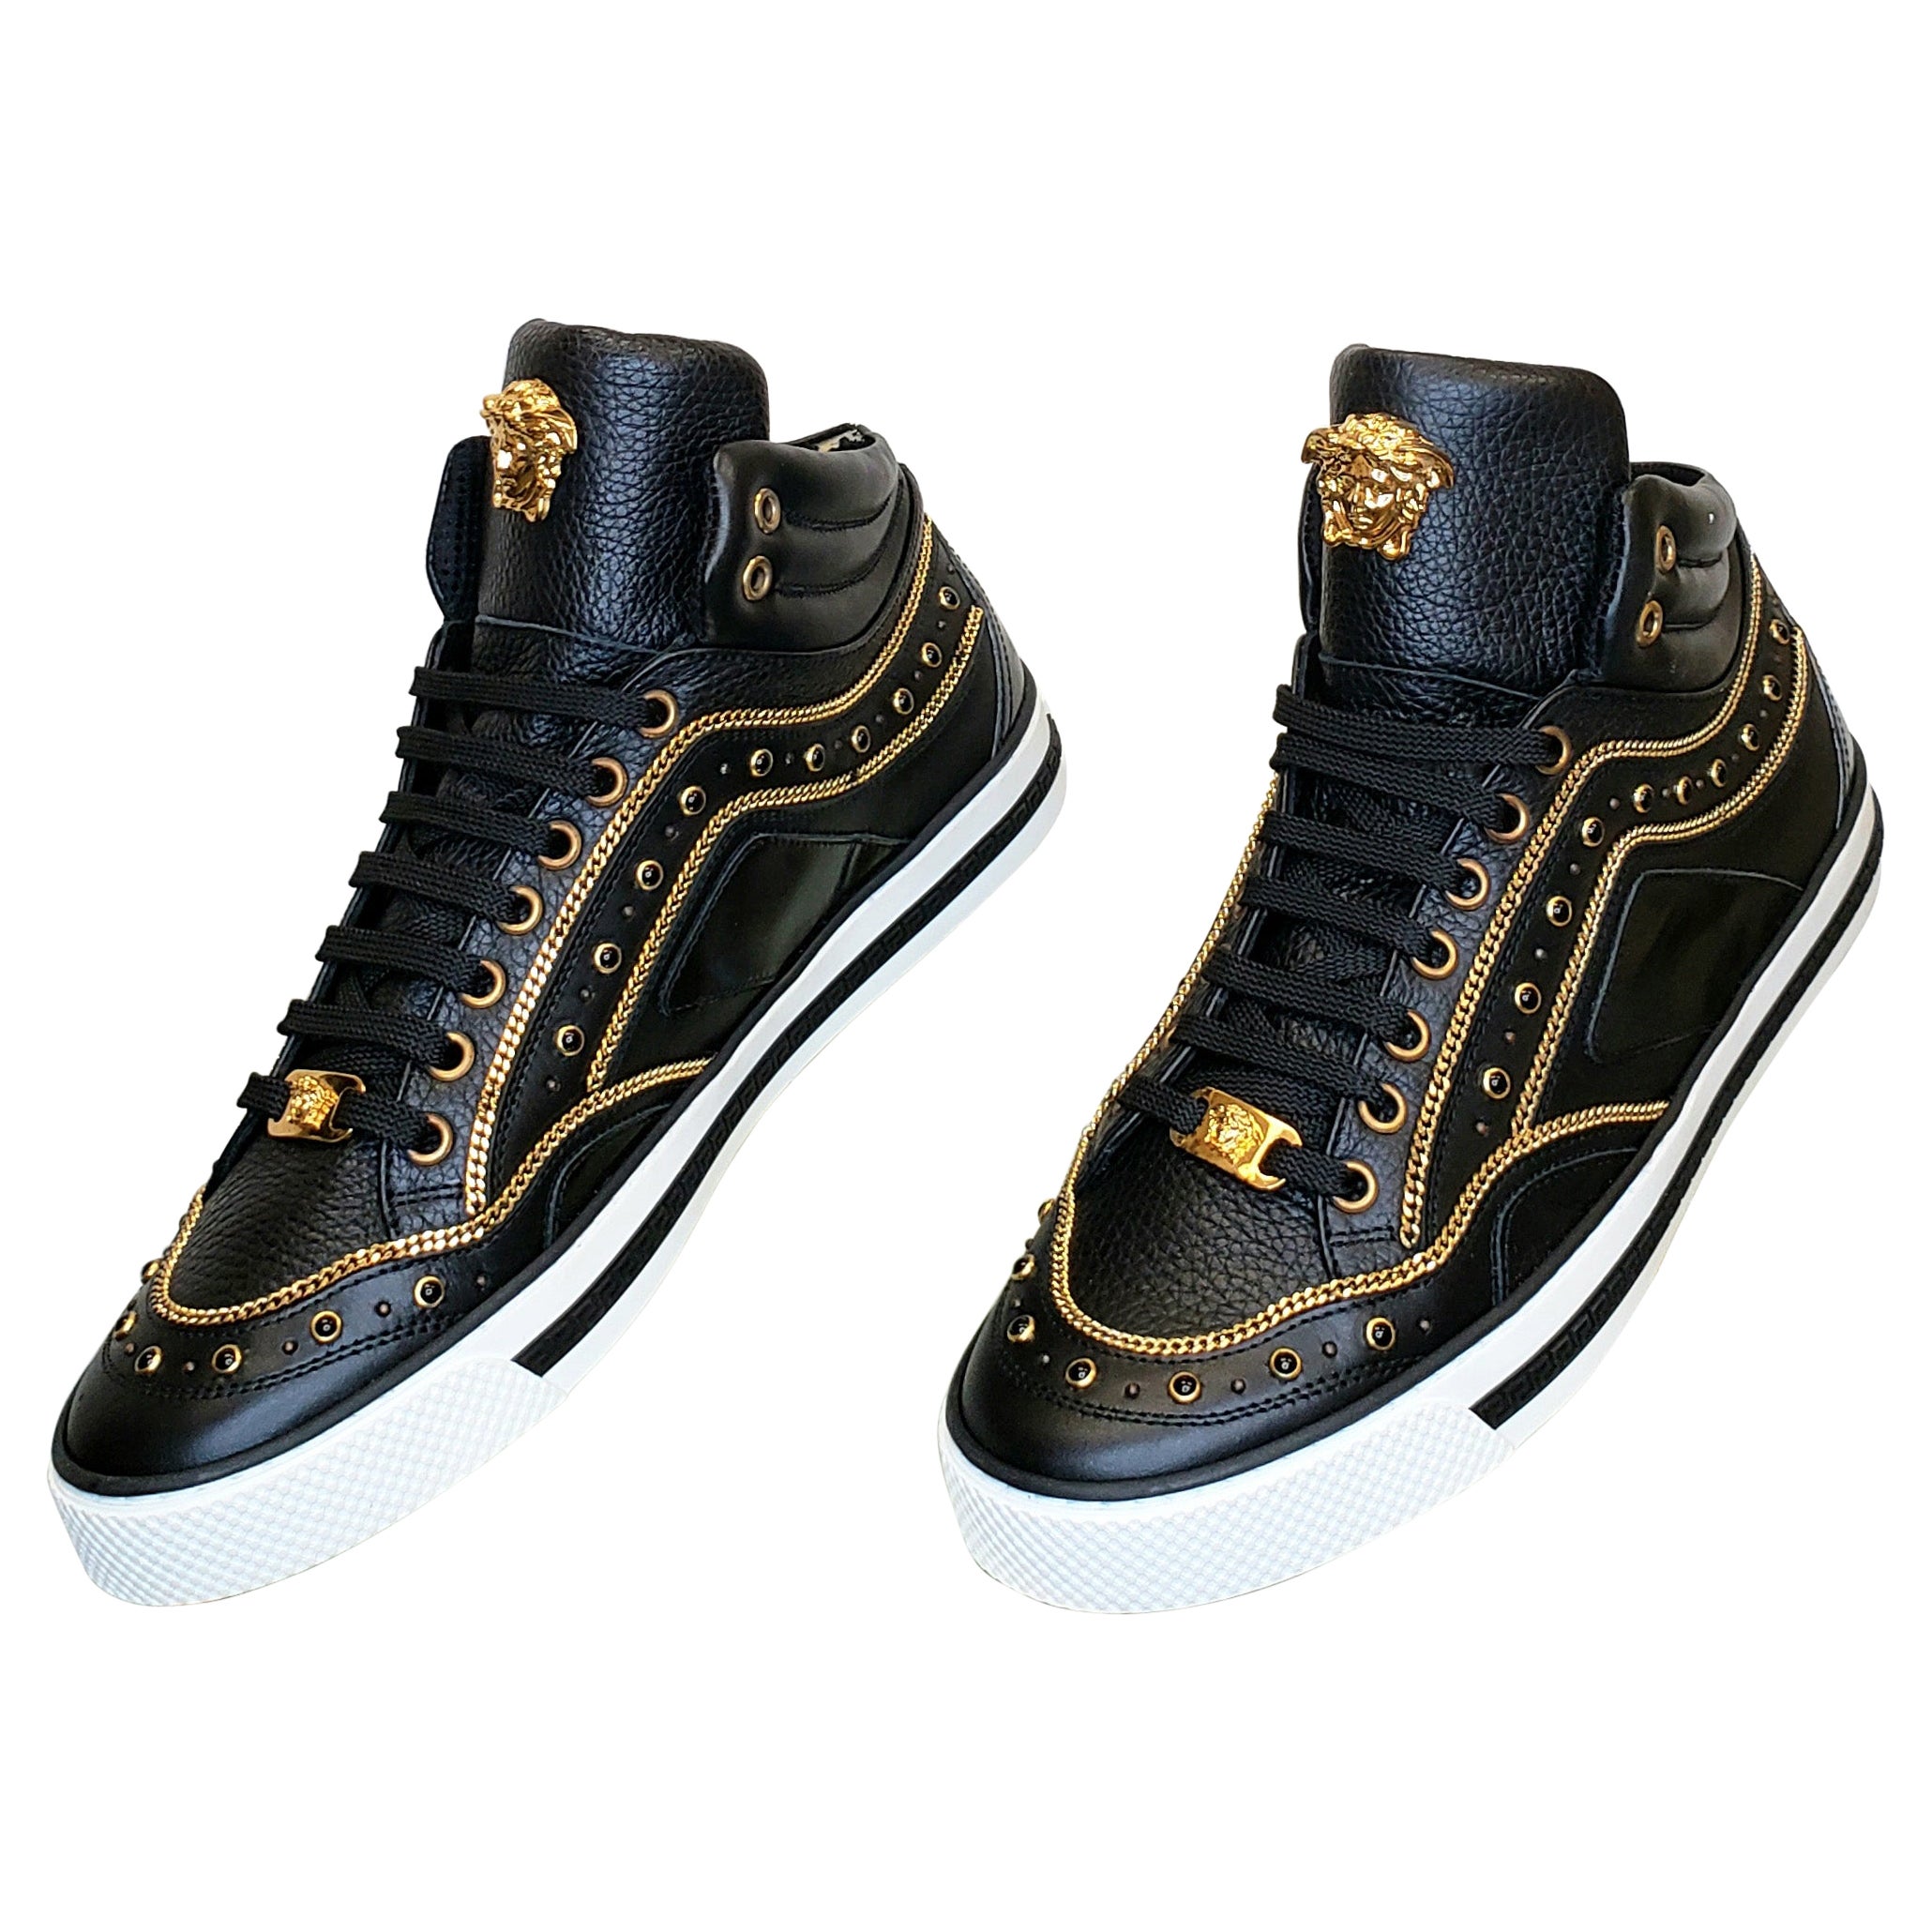 Gold Versace High Top Sneakers - For Sale on 1stDibs | gold high top  sneakers, versace high tops, versace gold shoes